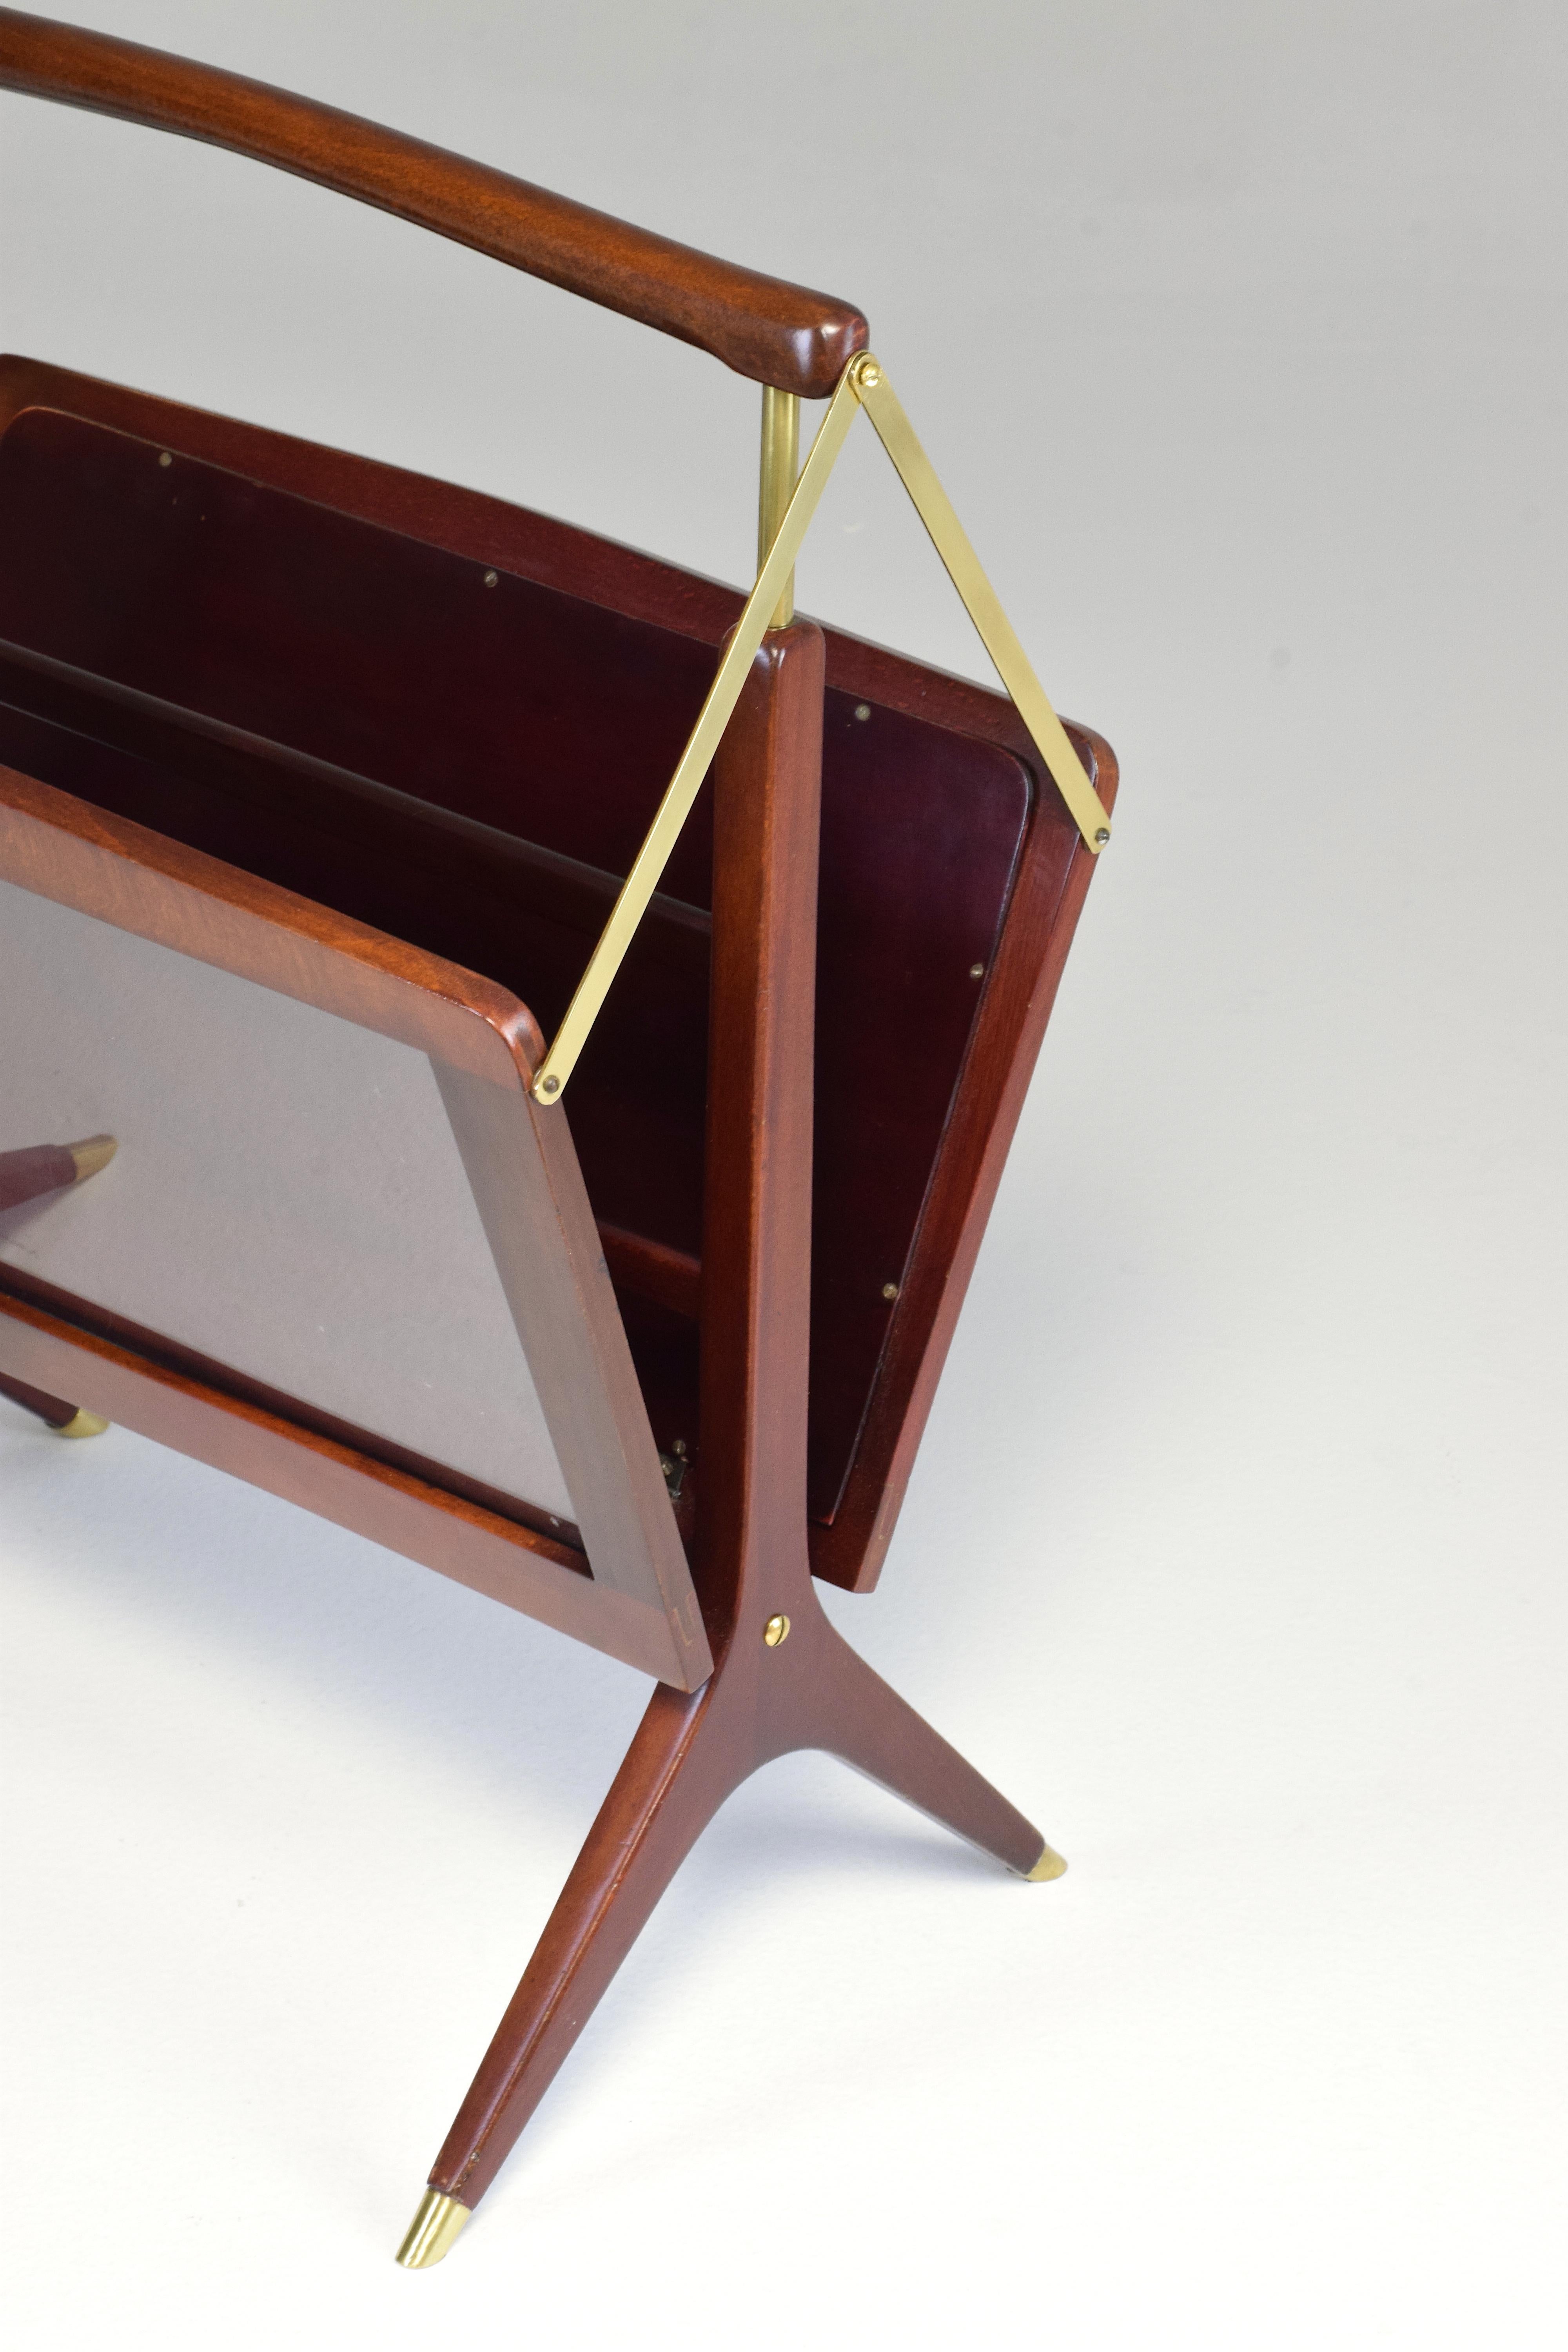 A 20th-century vintage foldable magazine and newspaper holder in the style of Italian designer Ico Parisi. Made in Italy circa the 1970's, this decorative stand is composed of re-finished wood, elegant brass details and see-through glass panels. 
A